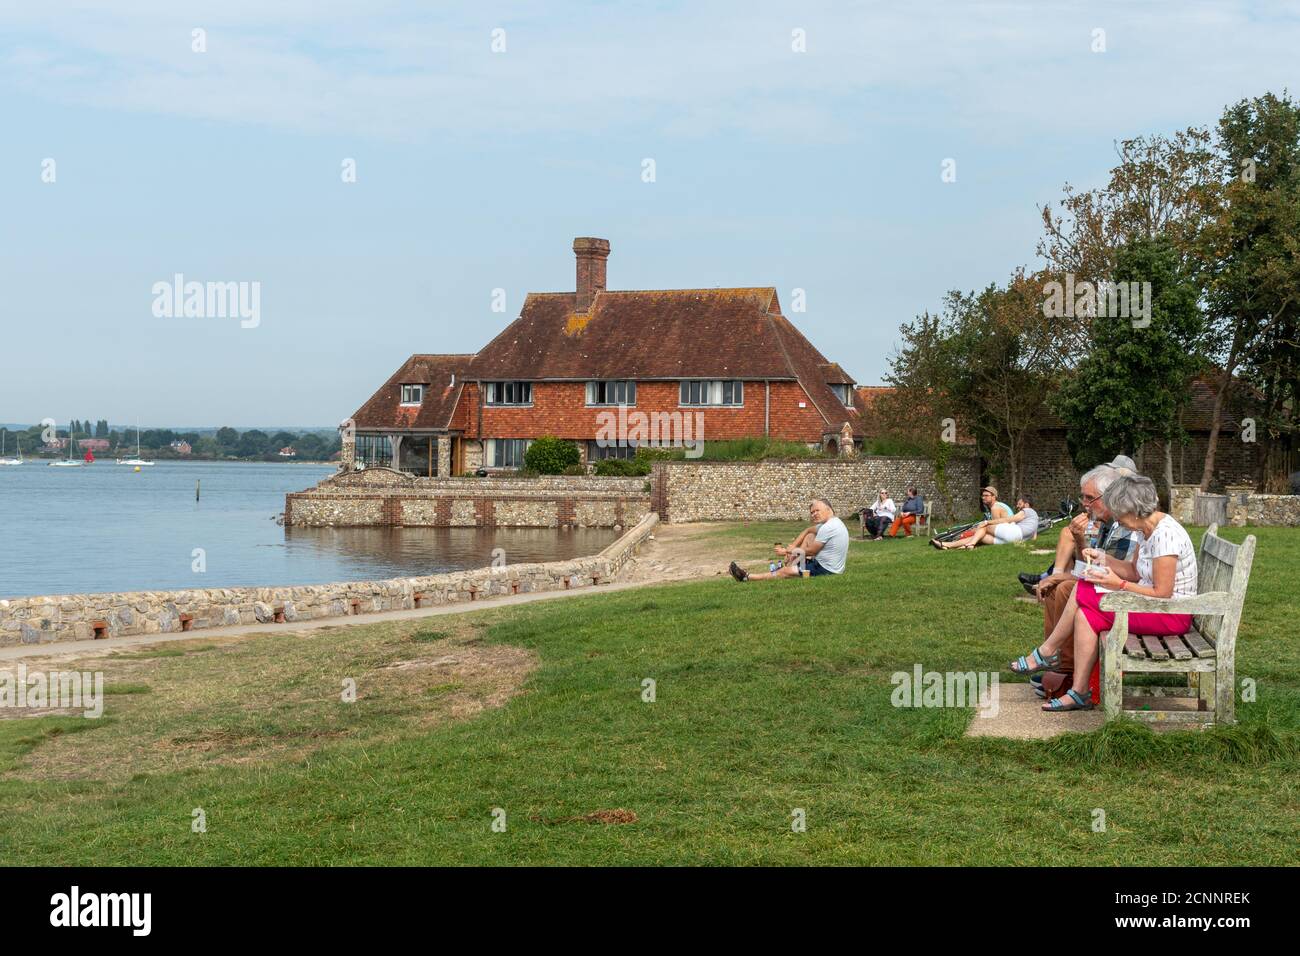 Visitors sitting and having picnics on the lawn overlooking Bosham Quay, a picturesque seaside village in West Sussex, UK Stock Photo